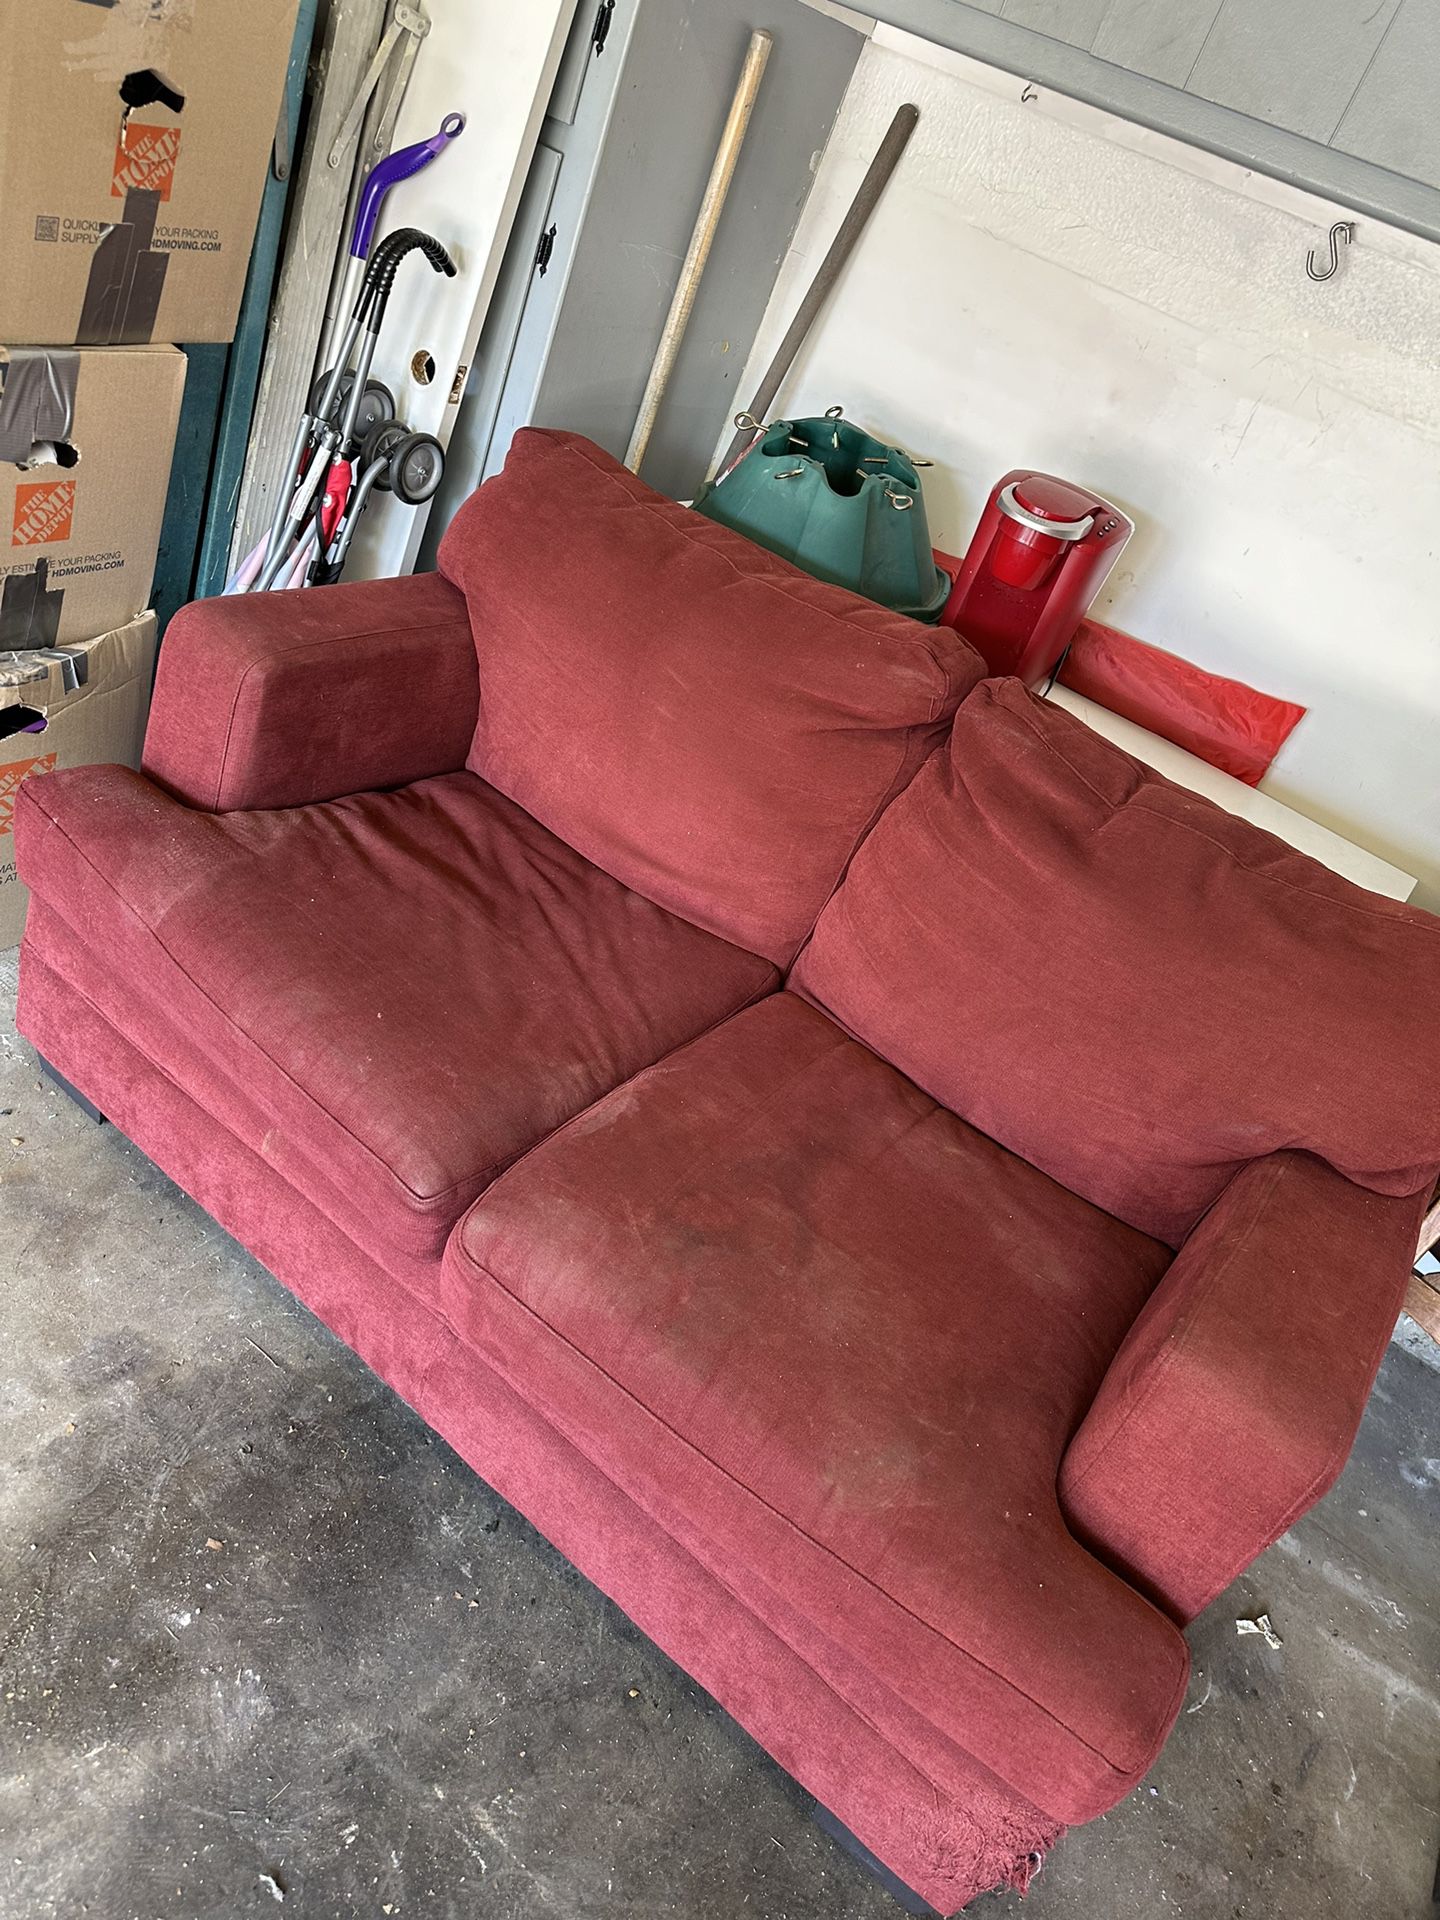 Red Couches